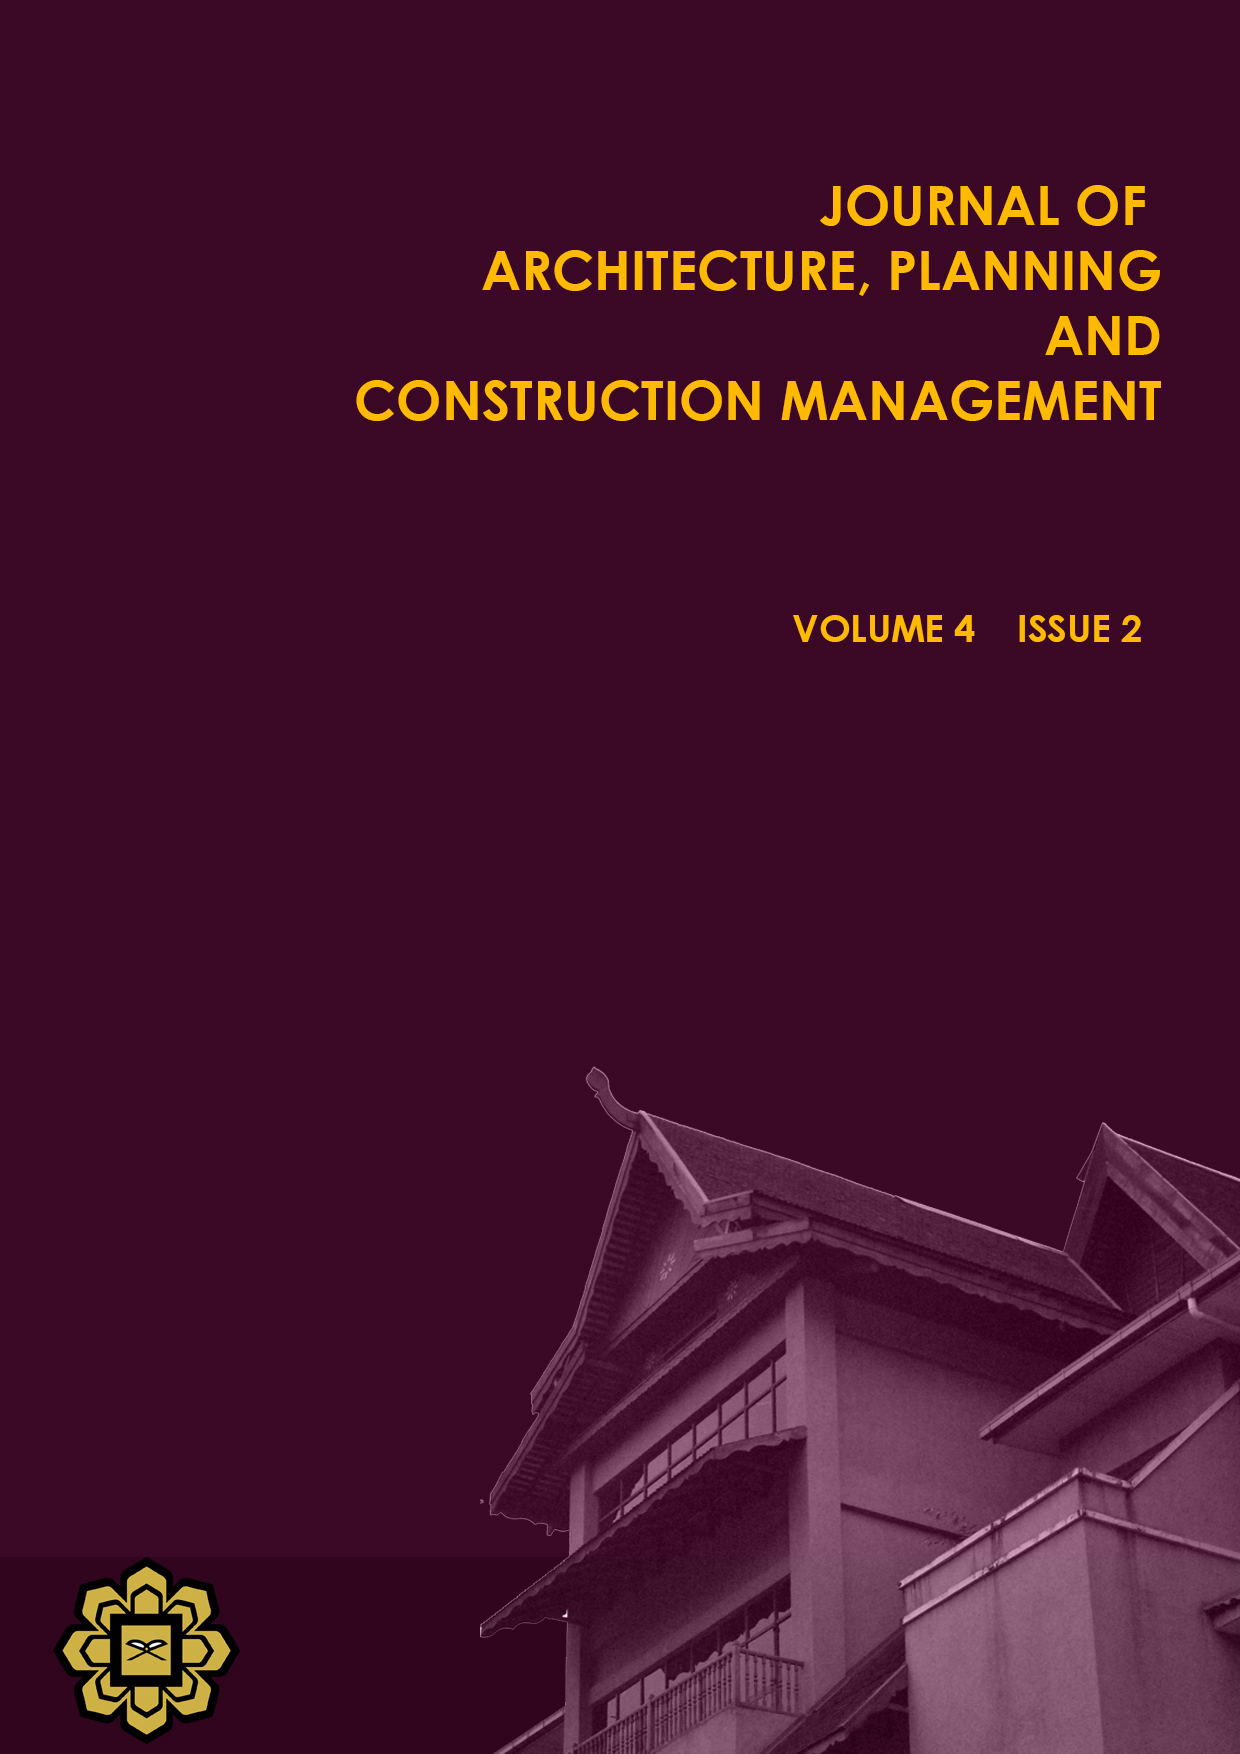 					View Vol. 4 No. 2 (2014): Journal of Architecture, Planning and Construction Management (JAPCM) 
				